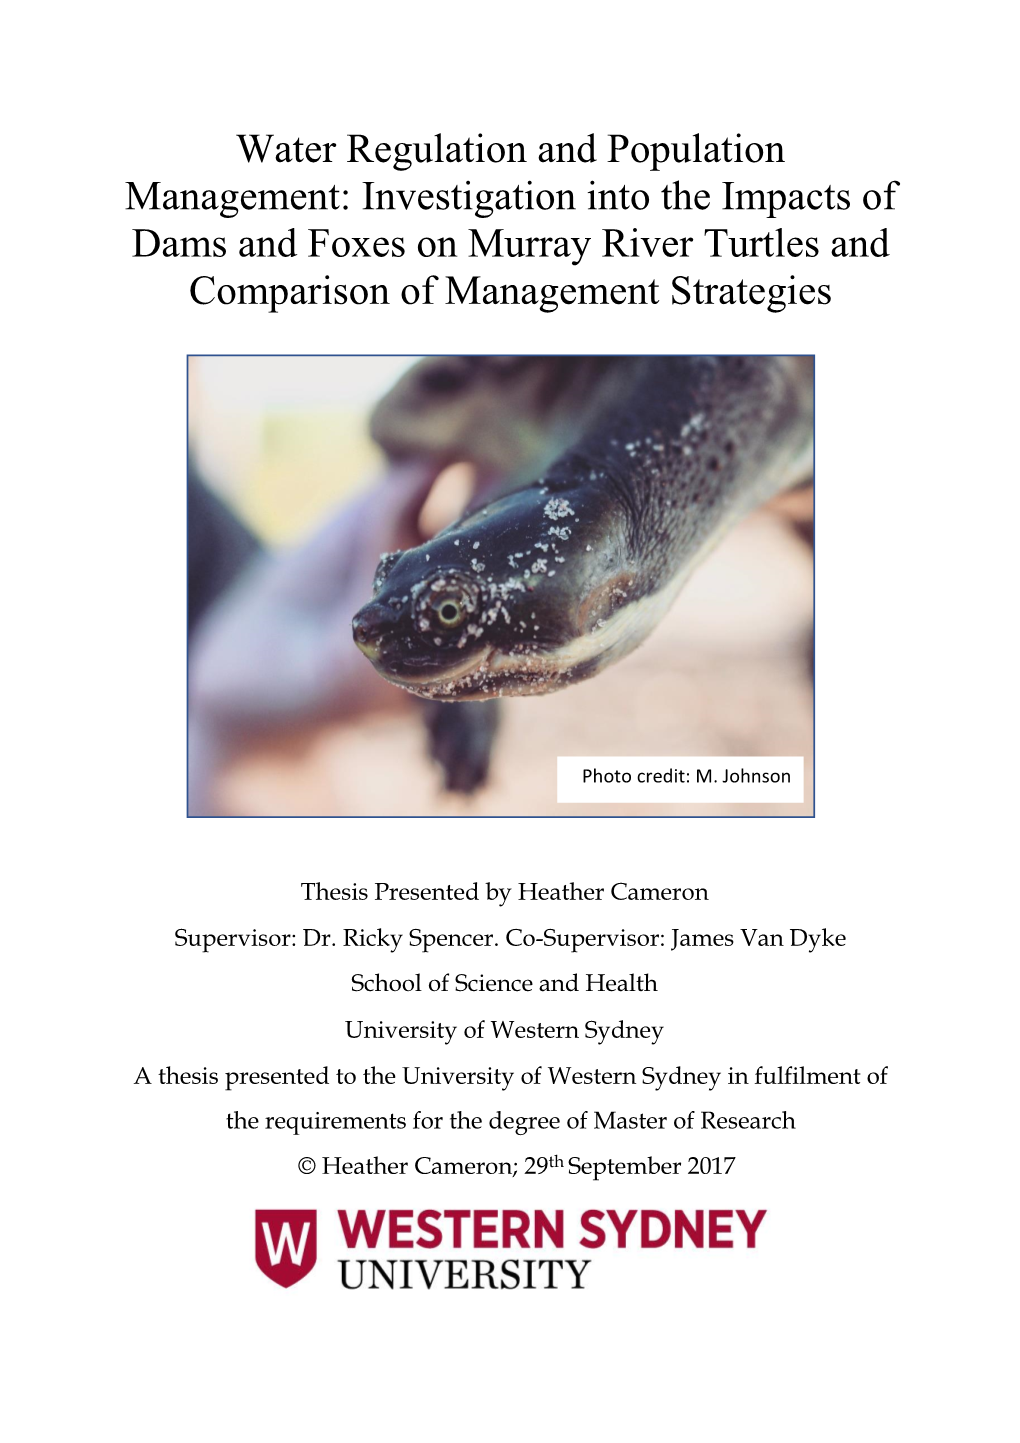 Investigation Into the Impacts of Dams and Foxes on Murray River Turtles and Comparison of Management Strategies